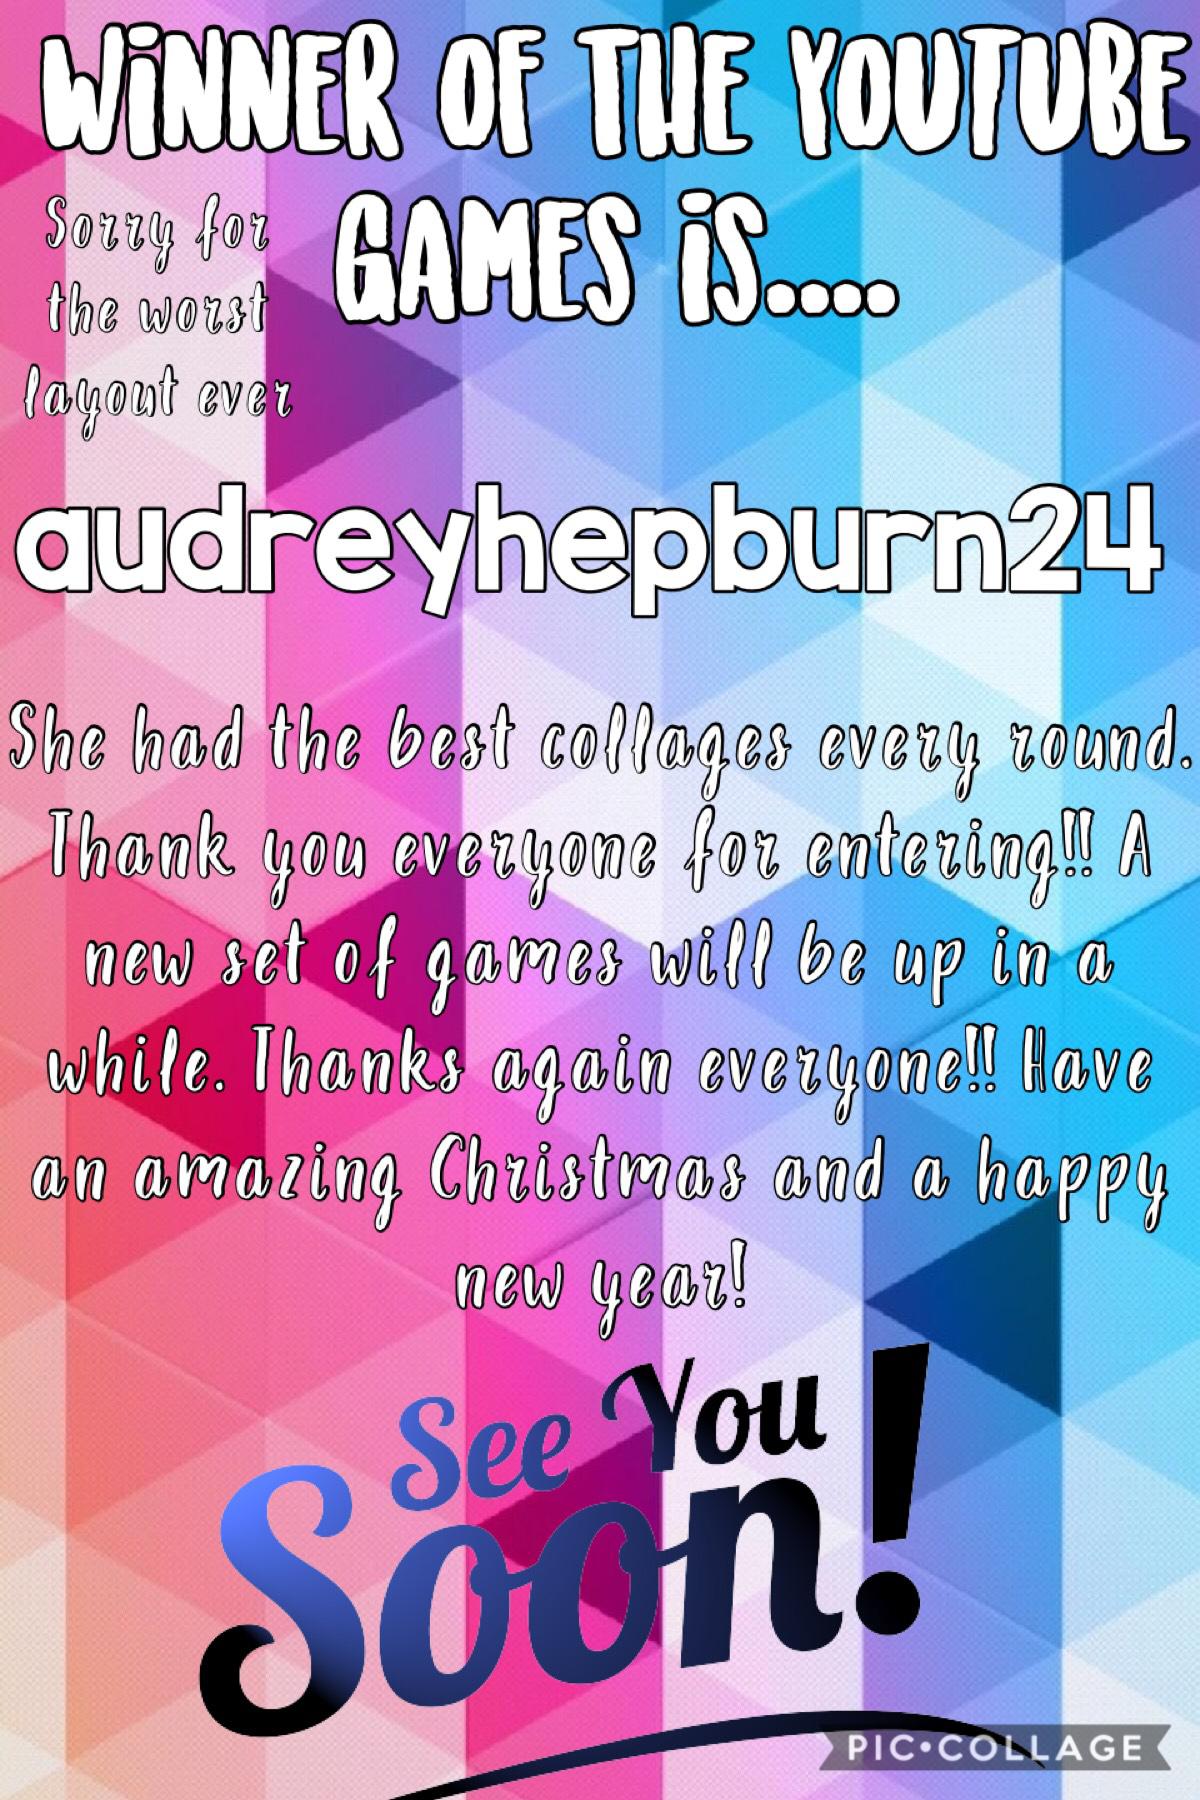 Congratulations to audreyhepburn24!!!  New games will either be up shortly, or in the next few days.